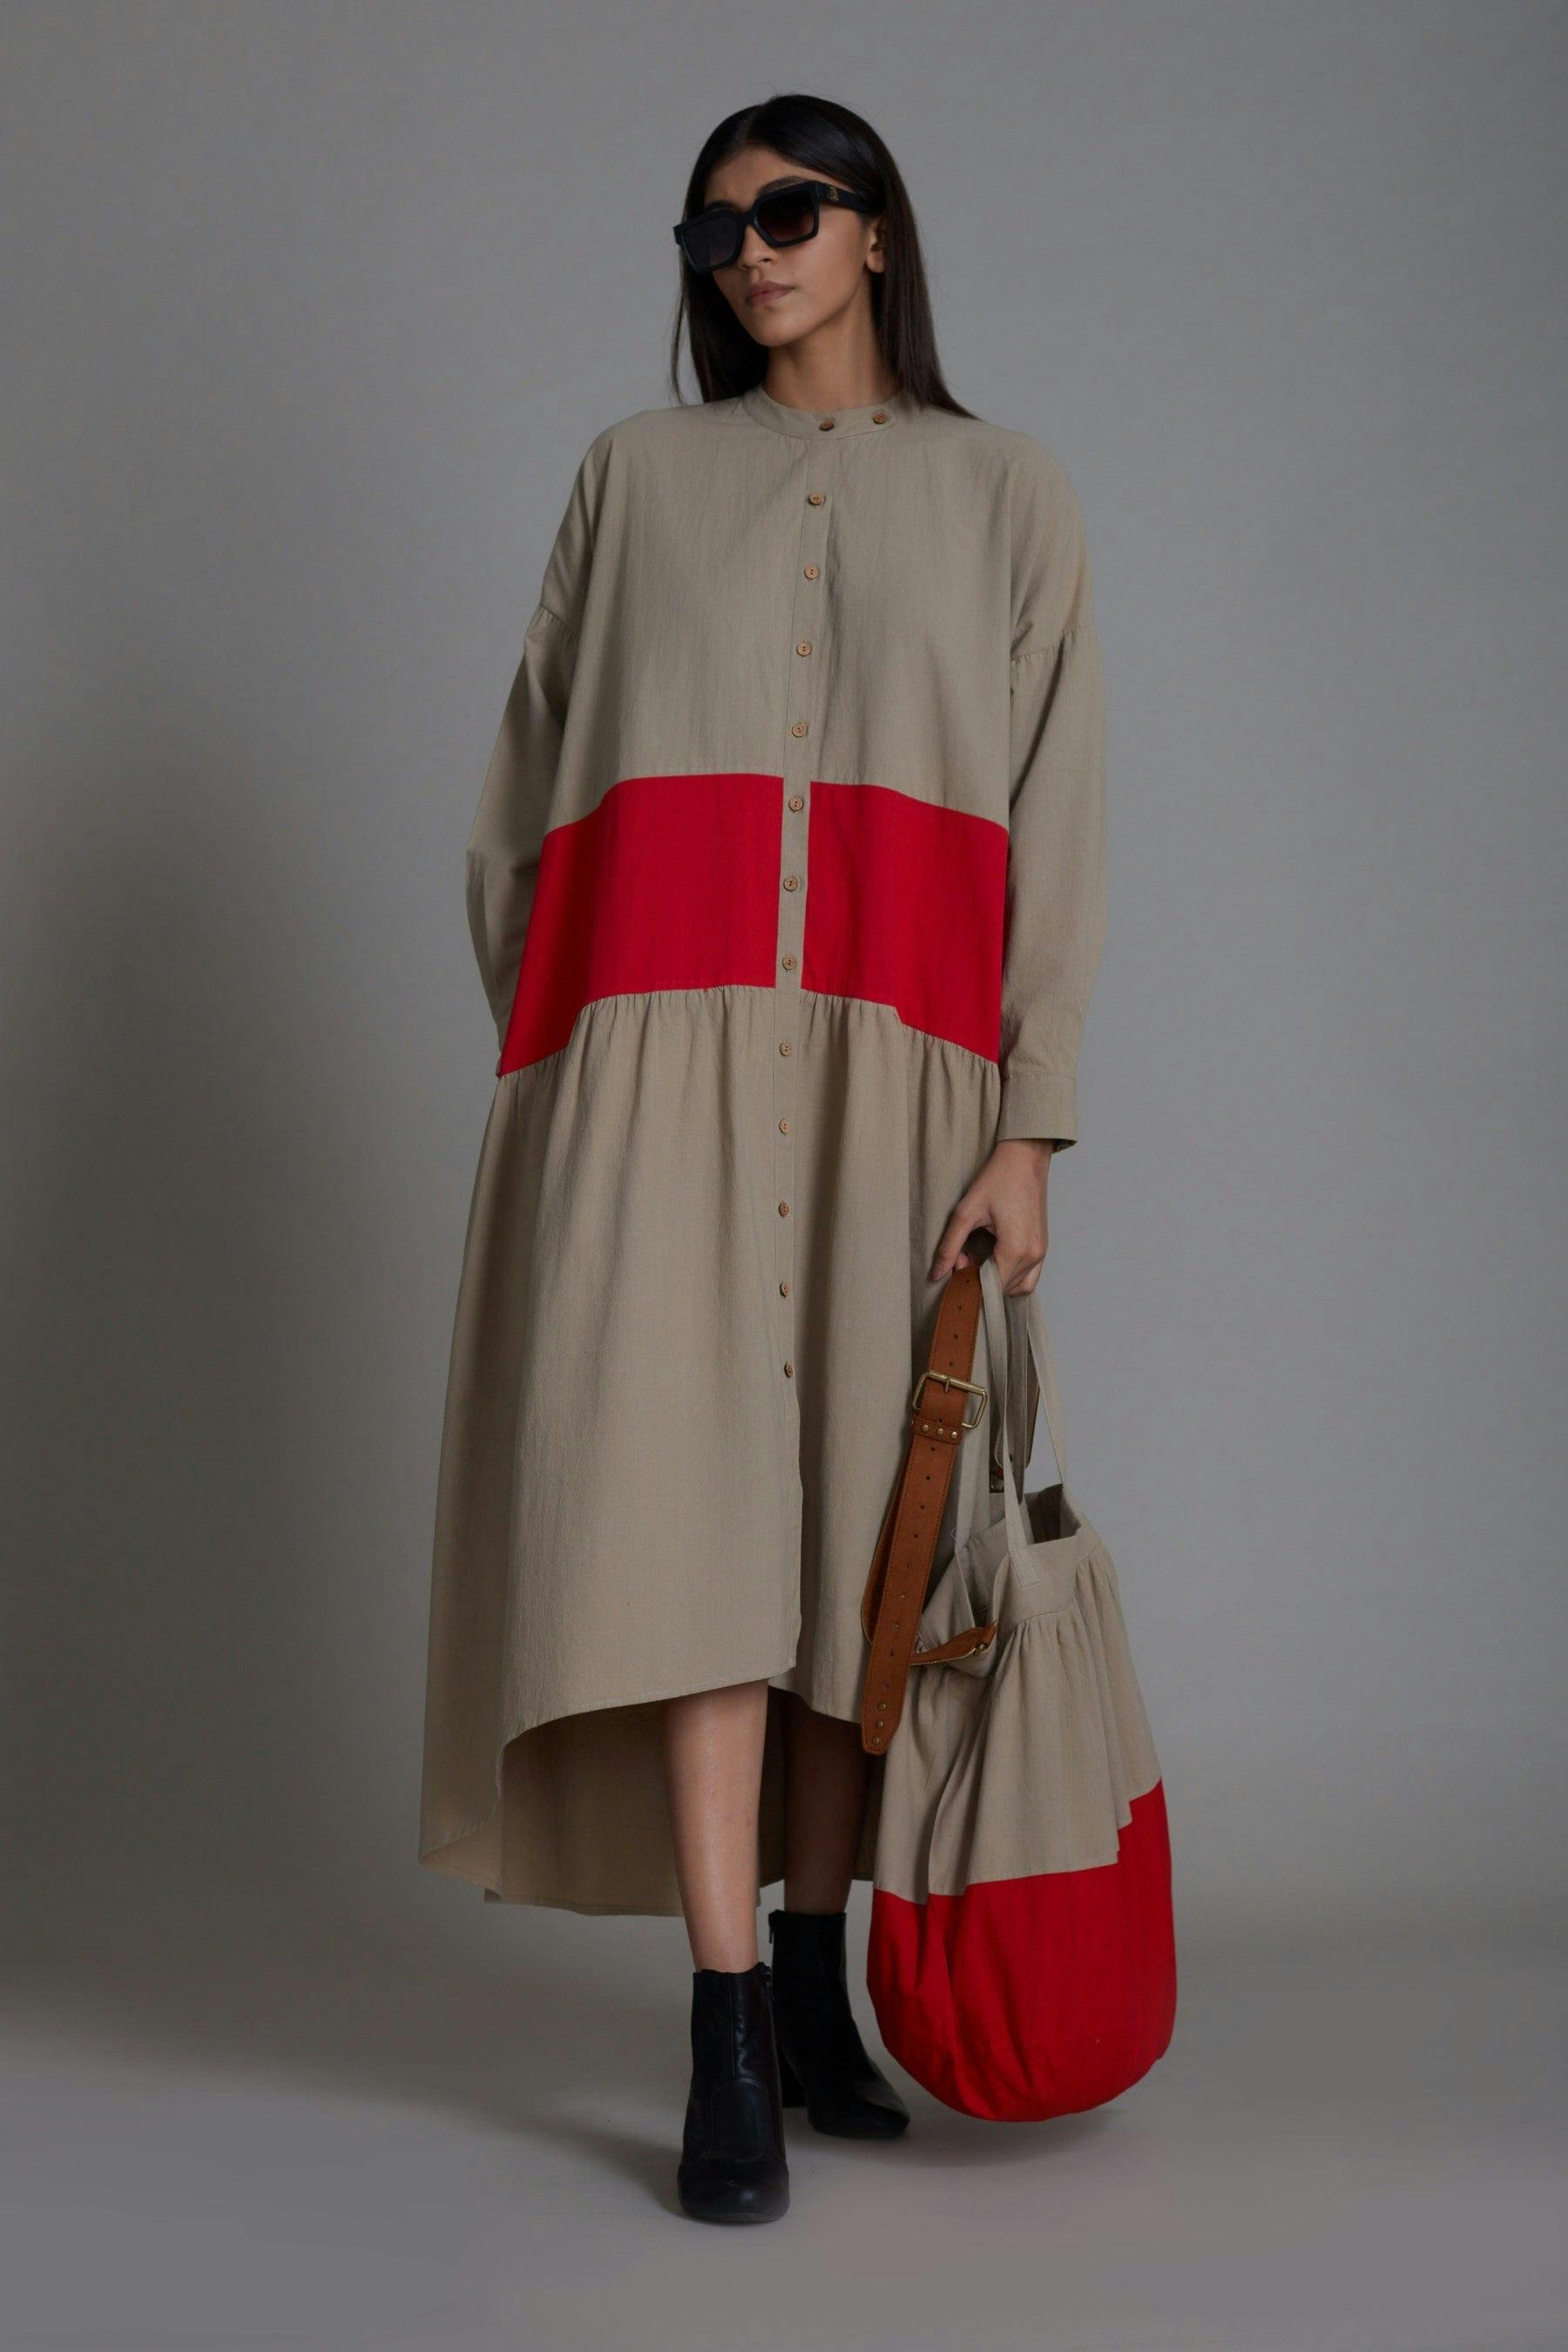 Beige & Red Band Dress, a product by Style Mati